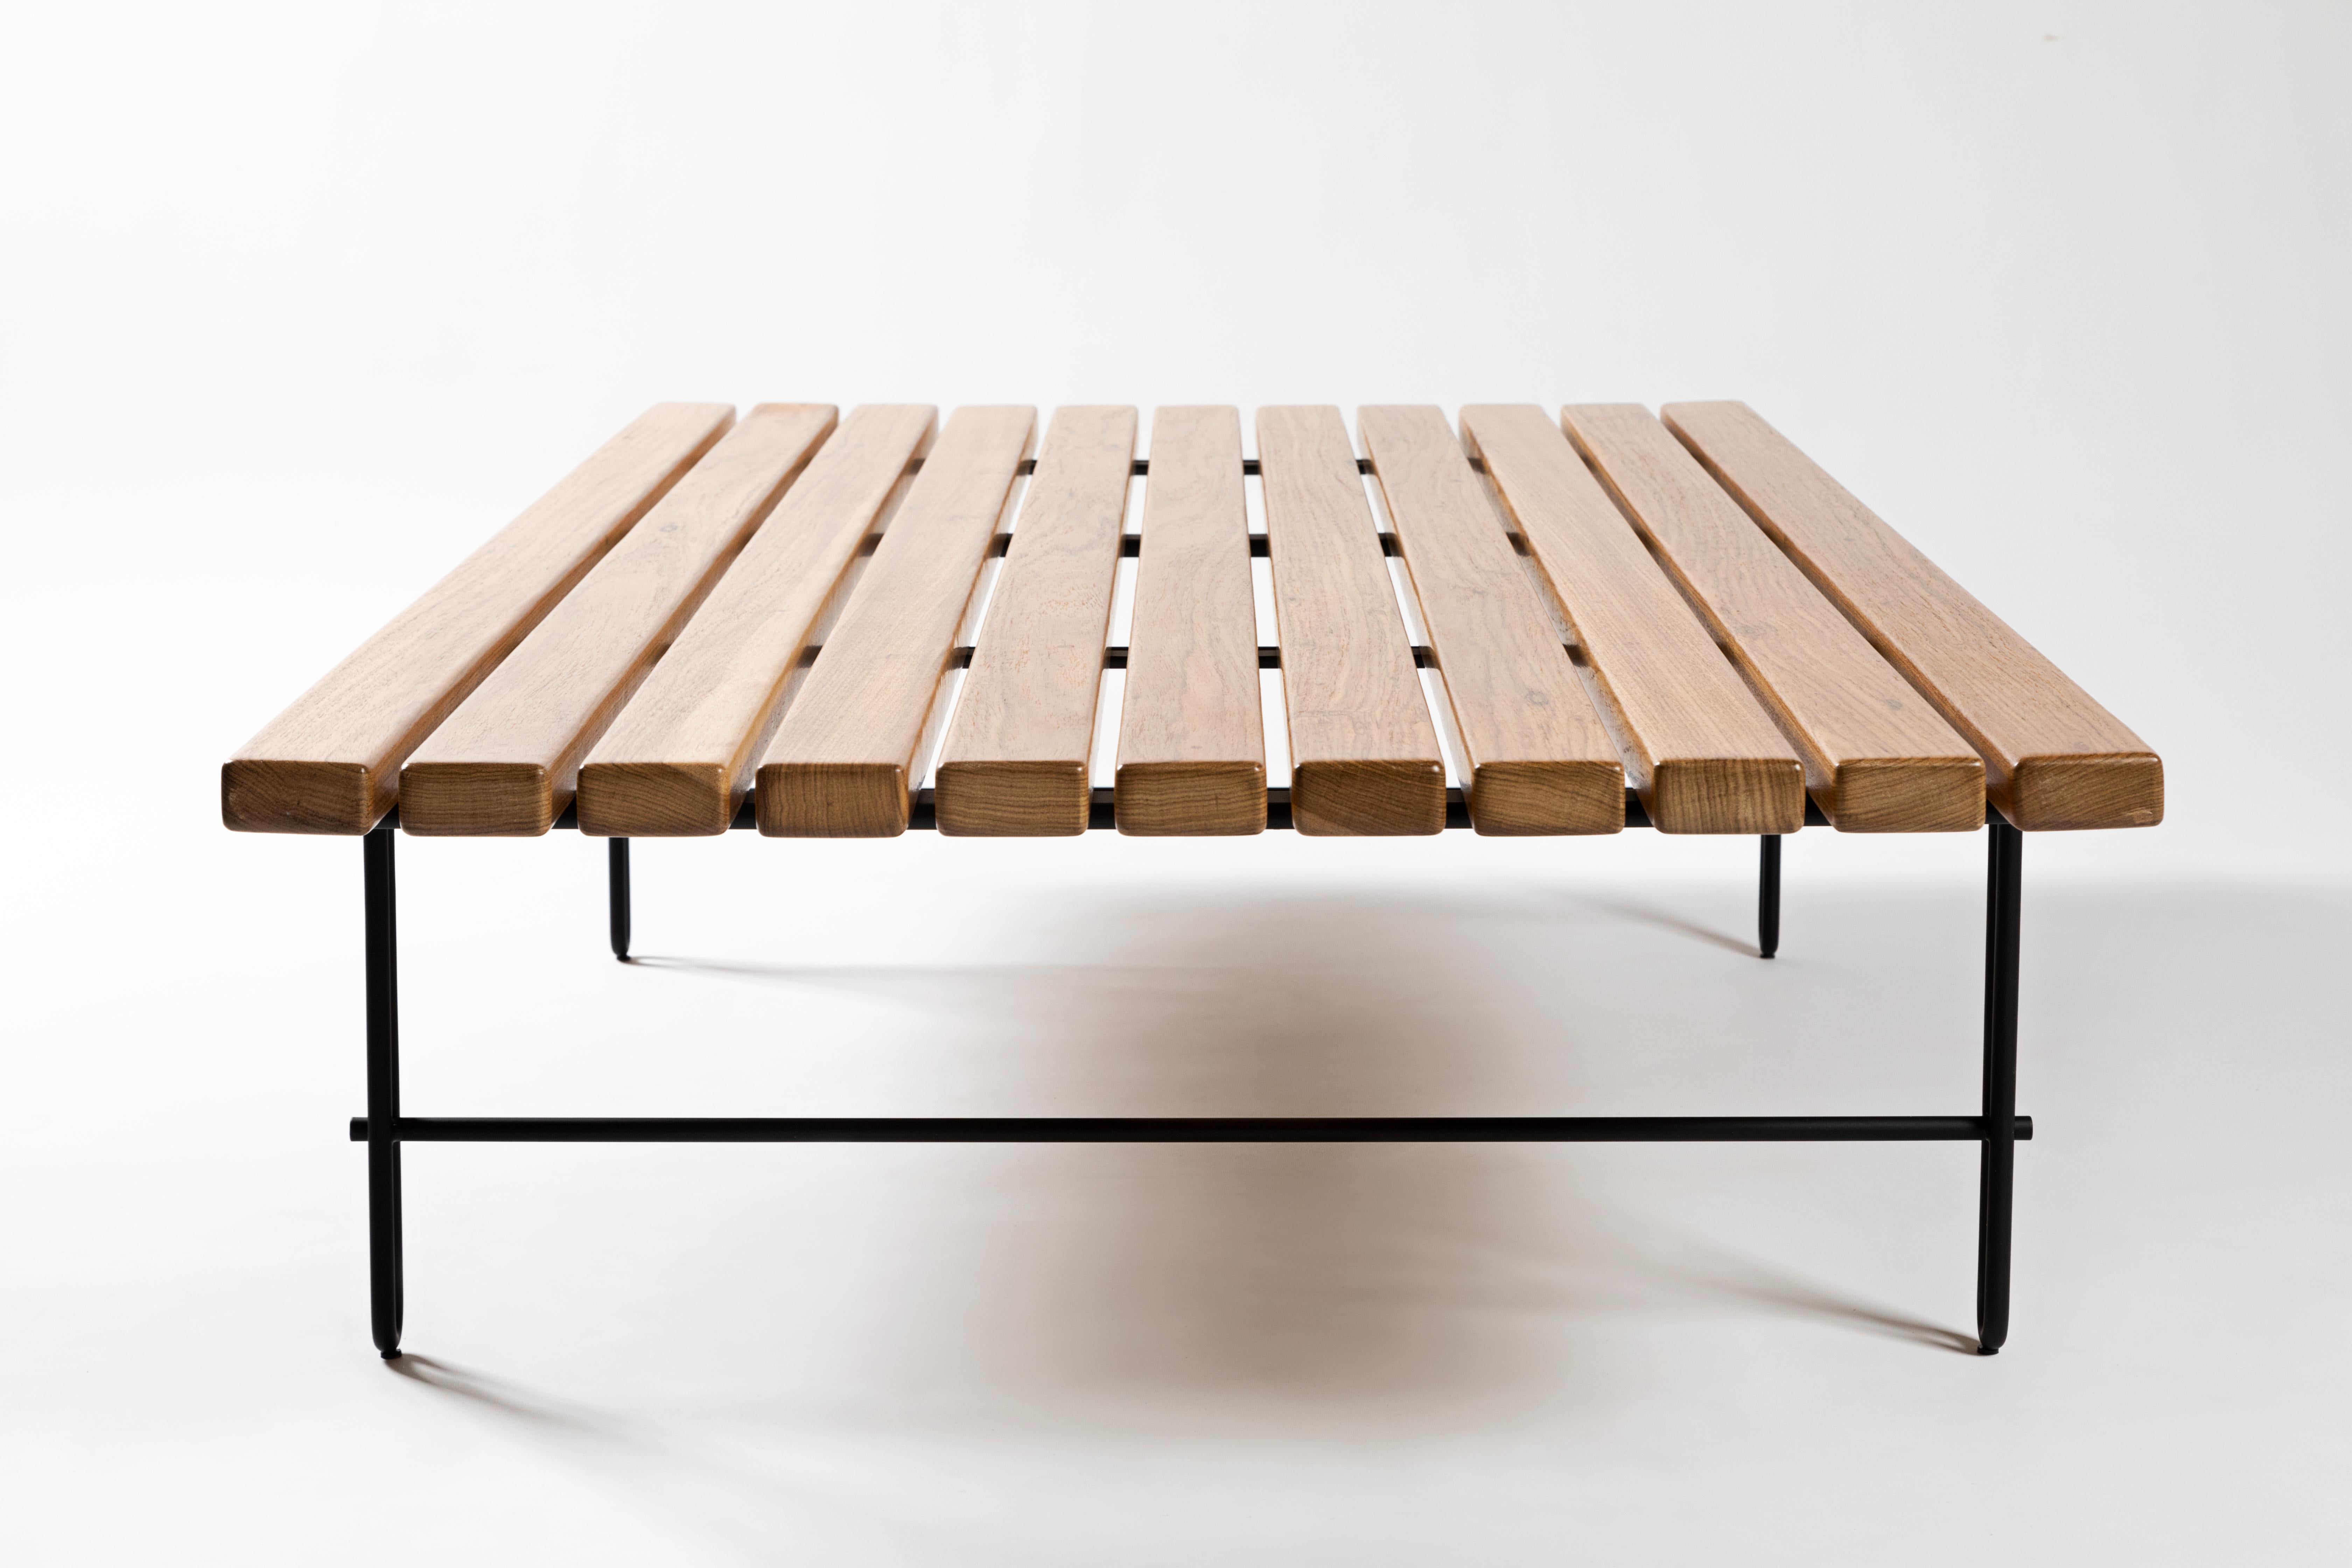 This contemporary styled coffee table in solid steel and wood offers maximum lightness without compromising functionality. With a modern Brazilian DNA, the table is designed in a classic and geometric reasoning. Strength and elegance skilfully